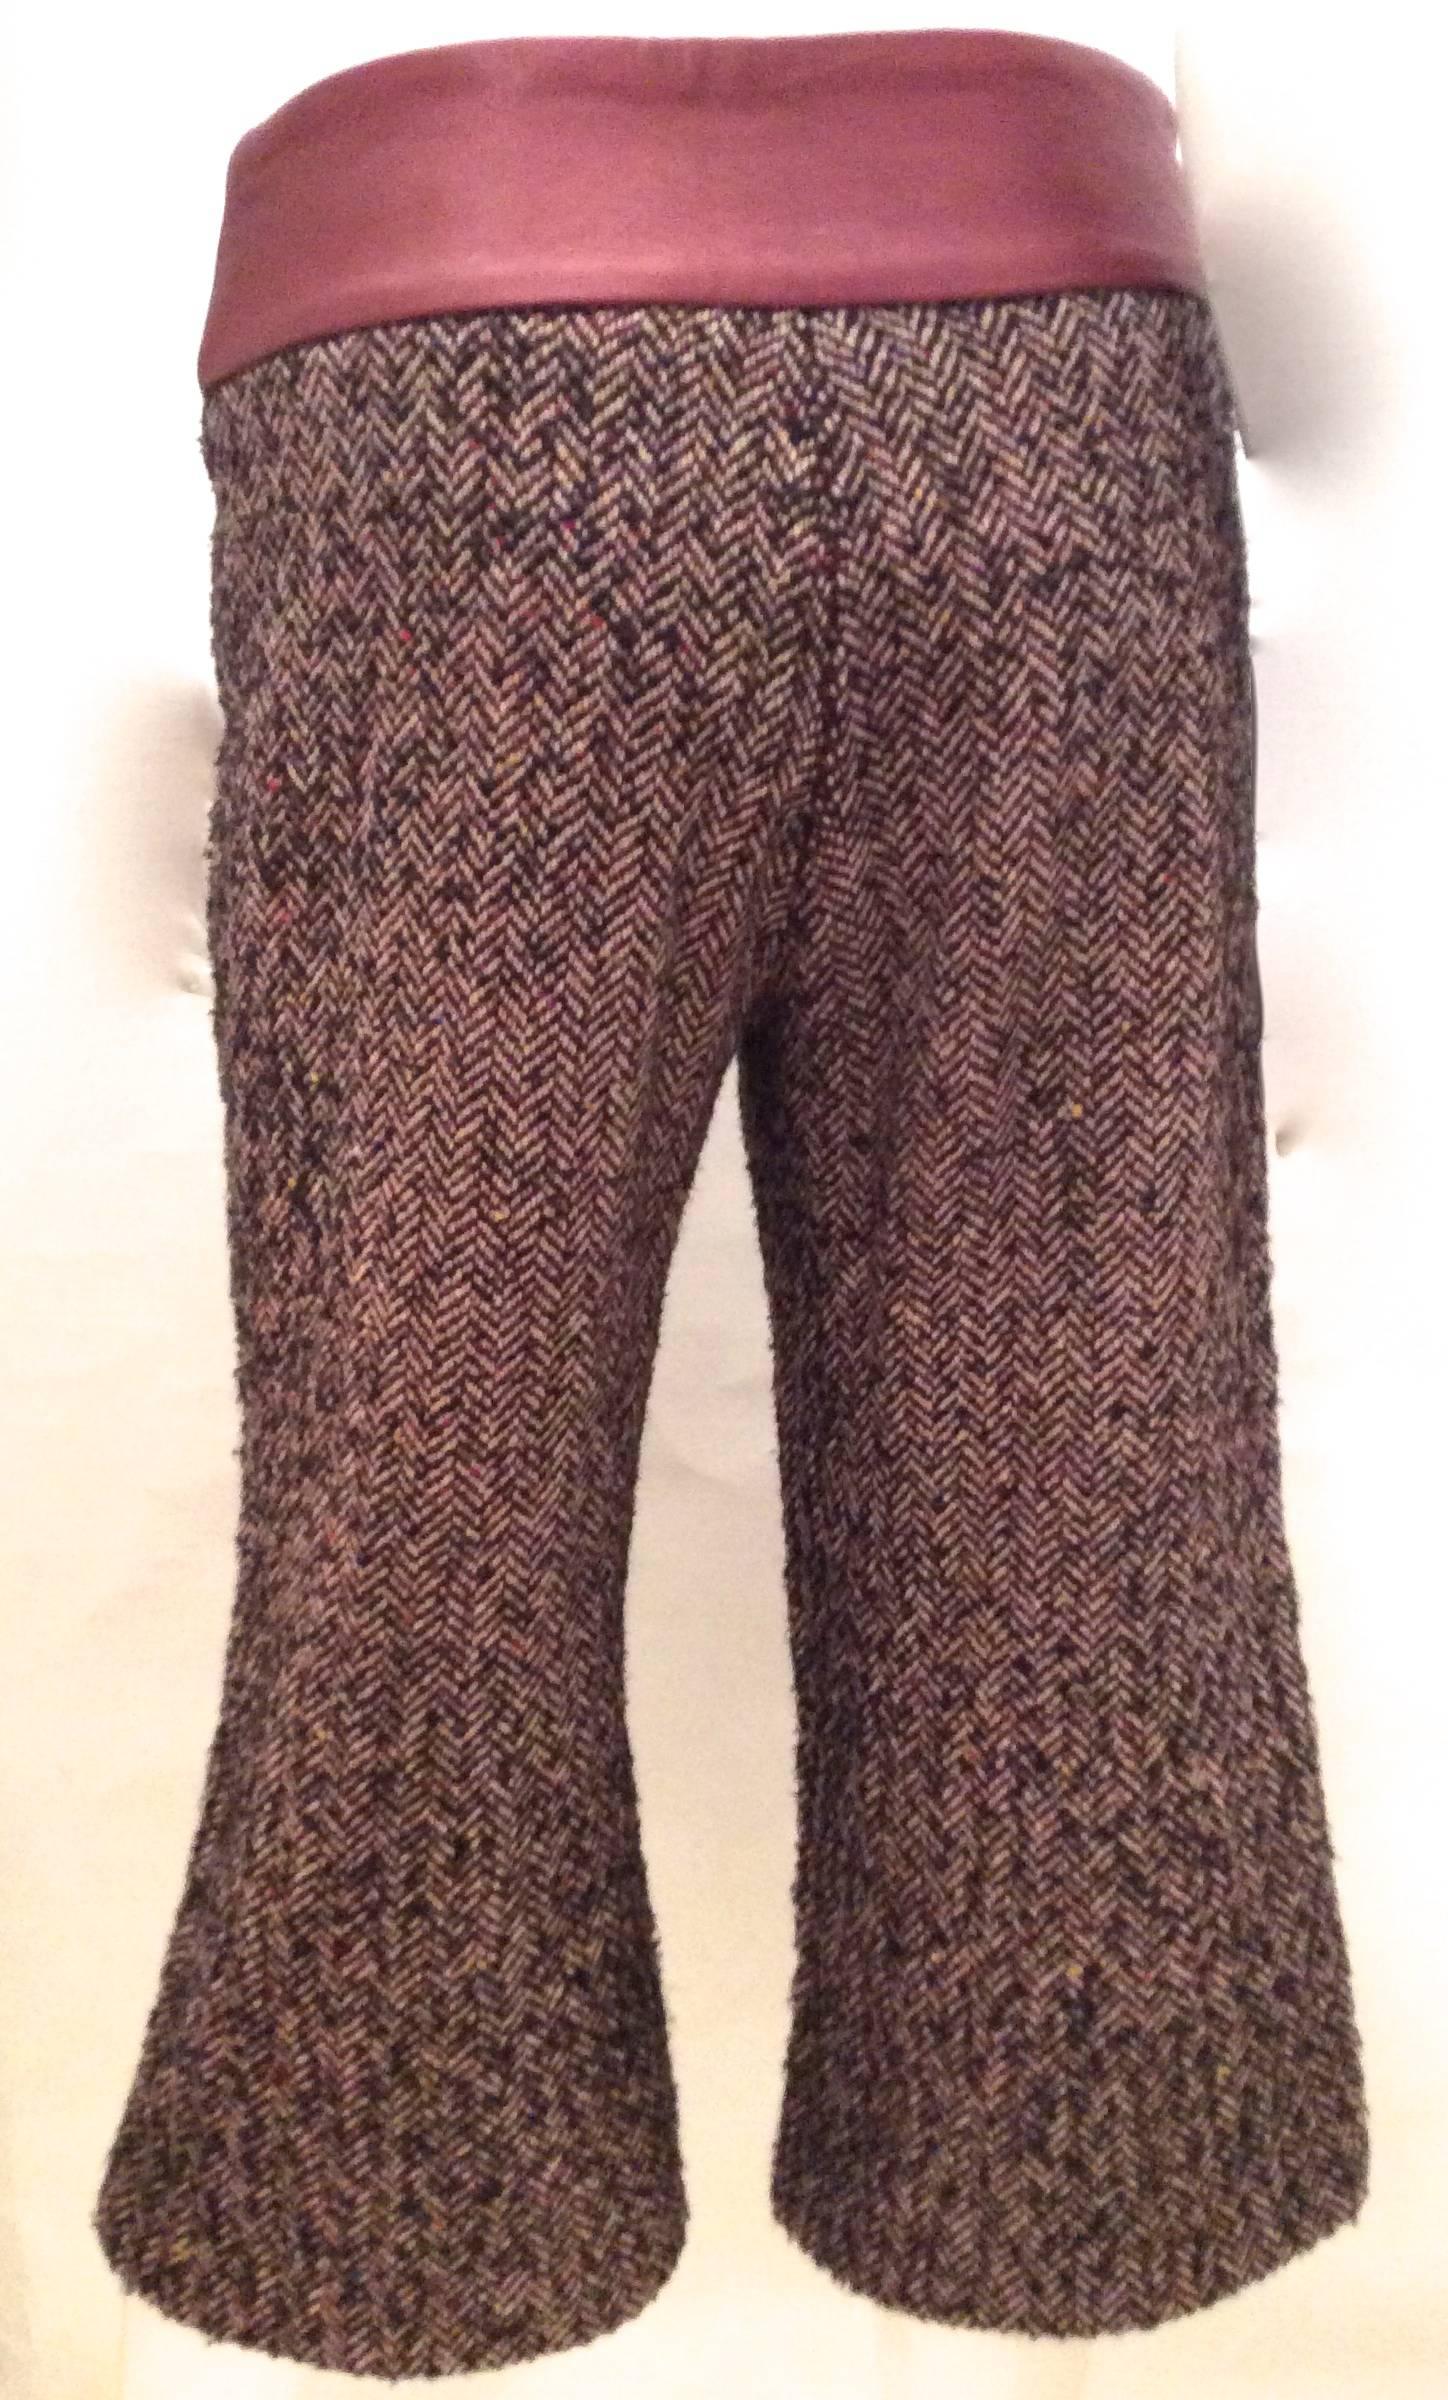 Gaucho Pants - Leather, Acrylic, Wool Blend - 1970's For Sale 1